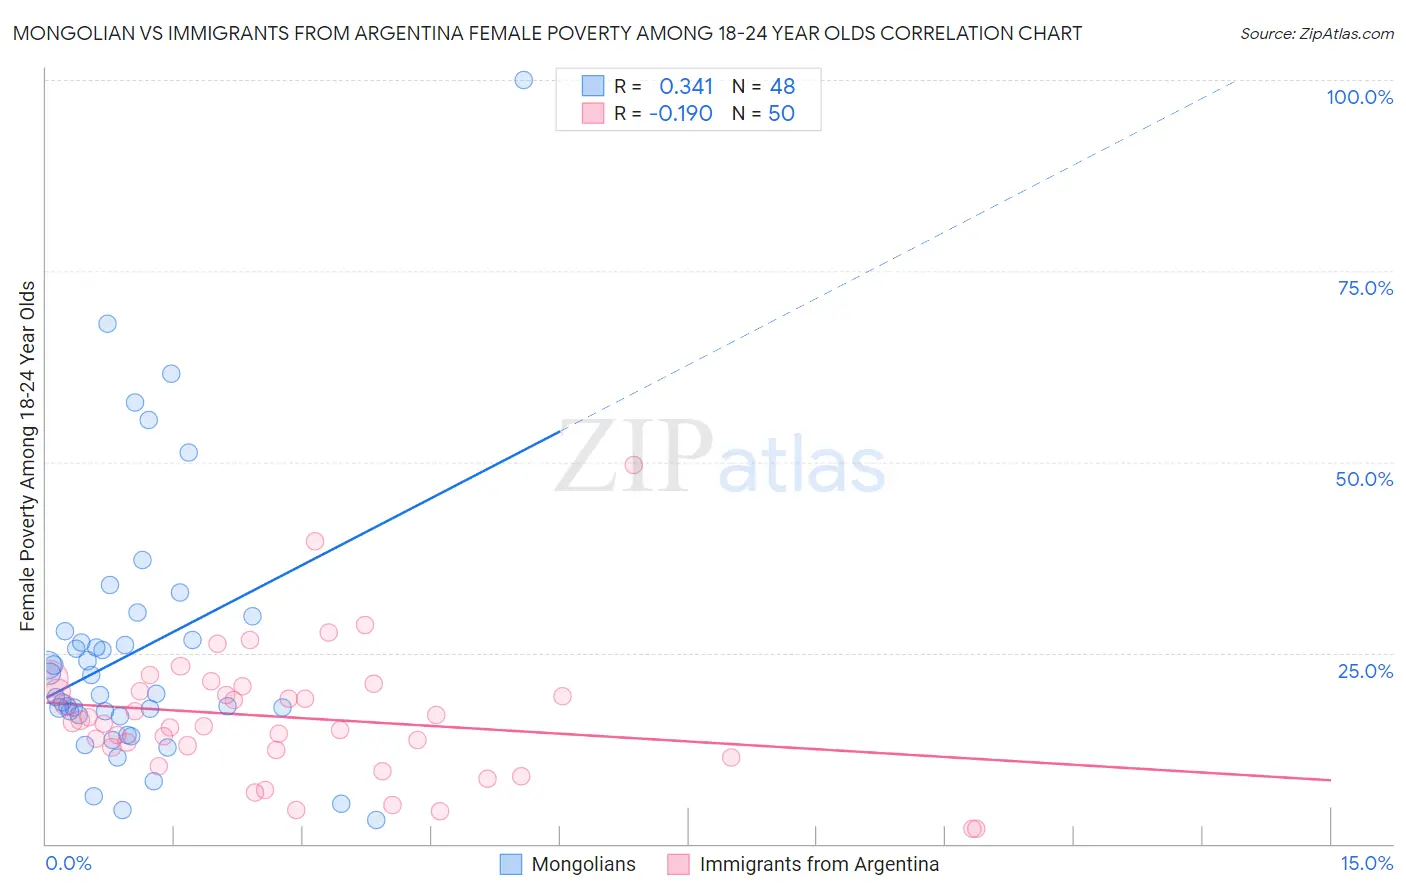 Mongolian vs Immigrants from Argentina Female Poverty Among 18-24 Year Olds